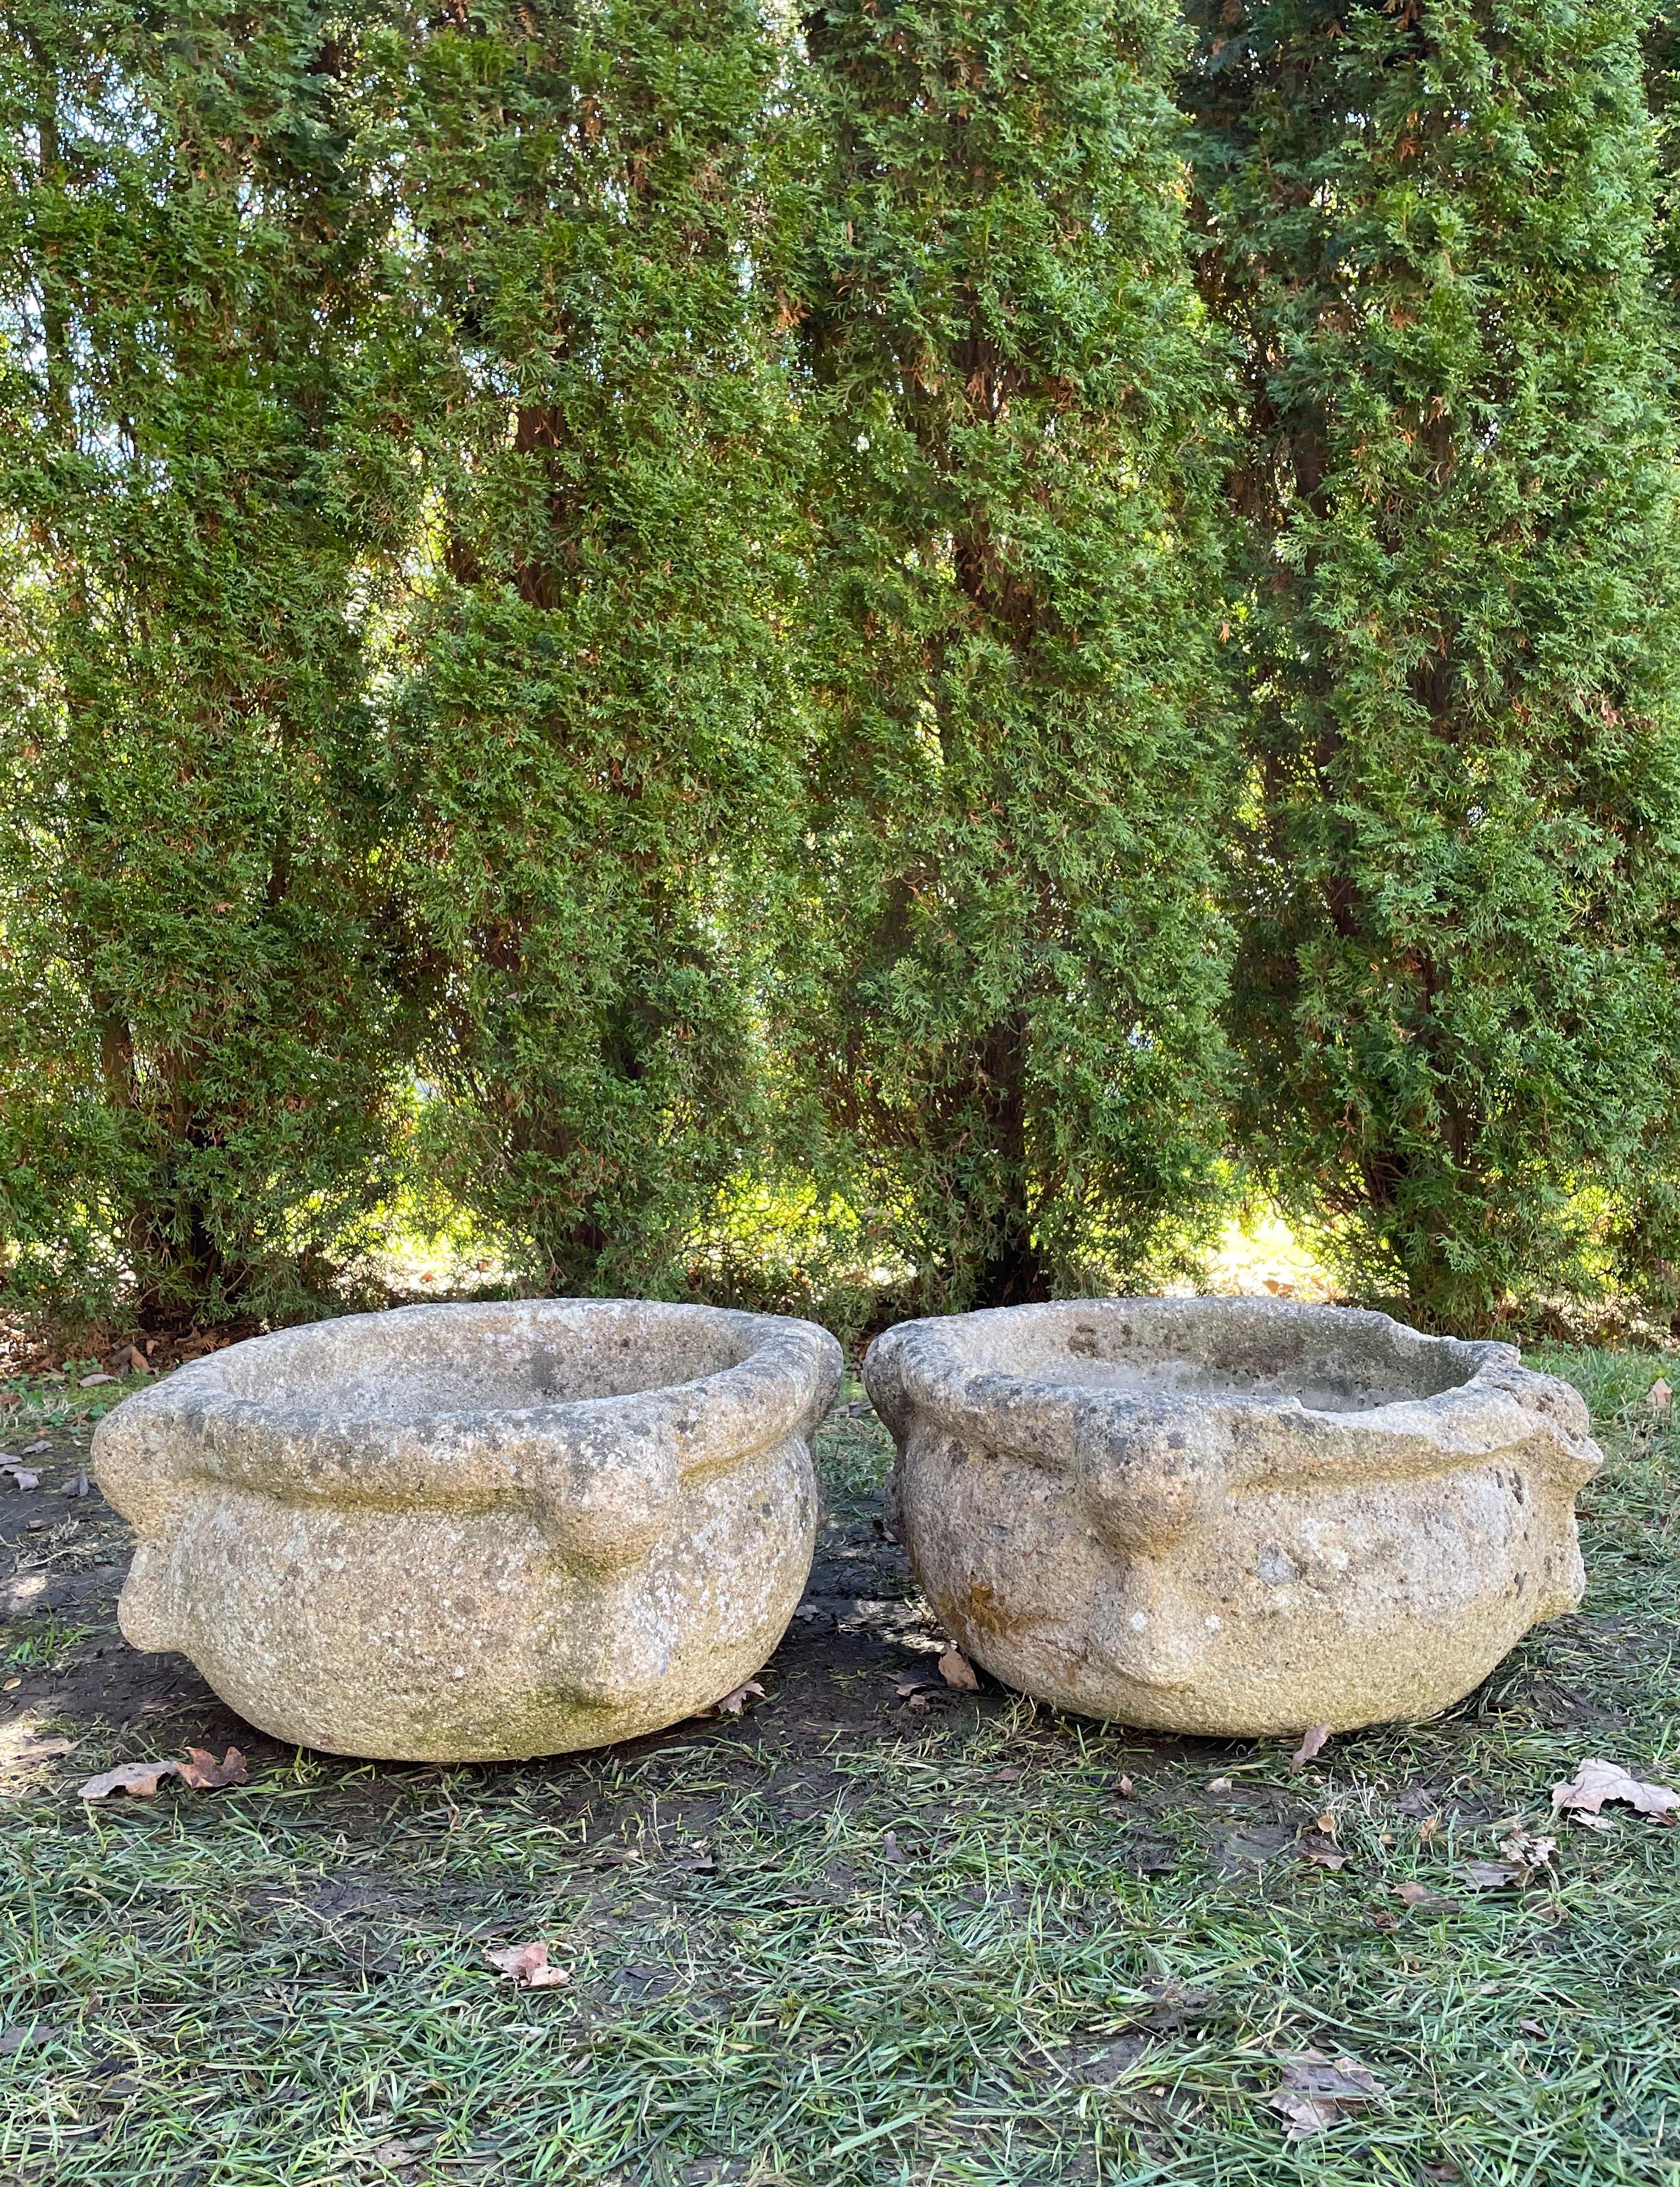 We love the form, size, and weathered patina on these cast stone vessels and, because pieces that can be used as sinks are always in great demand, we are selling them separately. Both are in excellent condition, but one has two lightly-weathered and